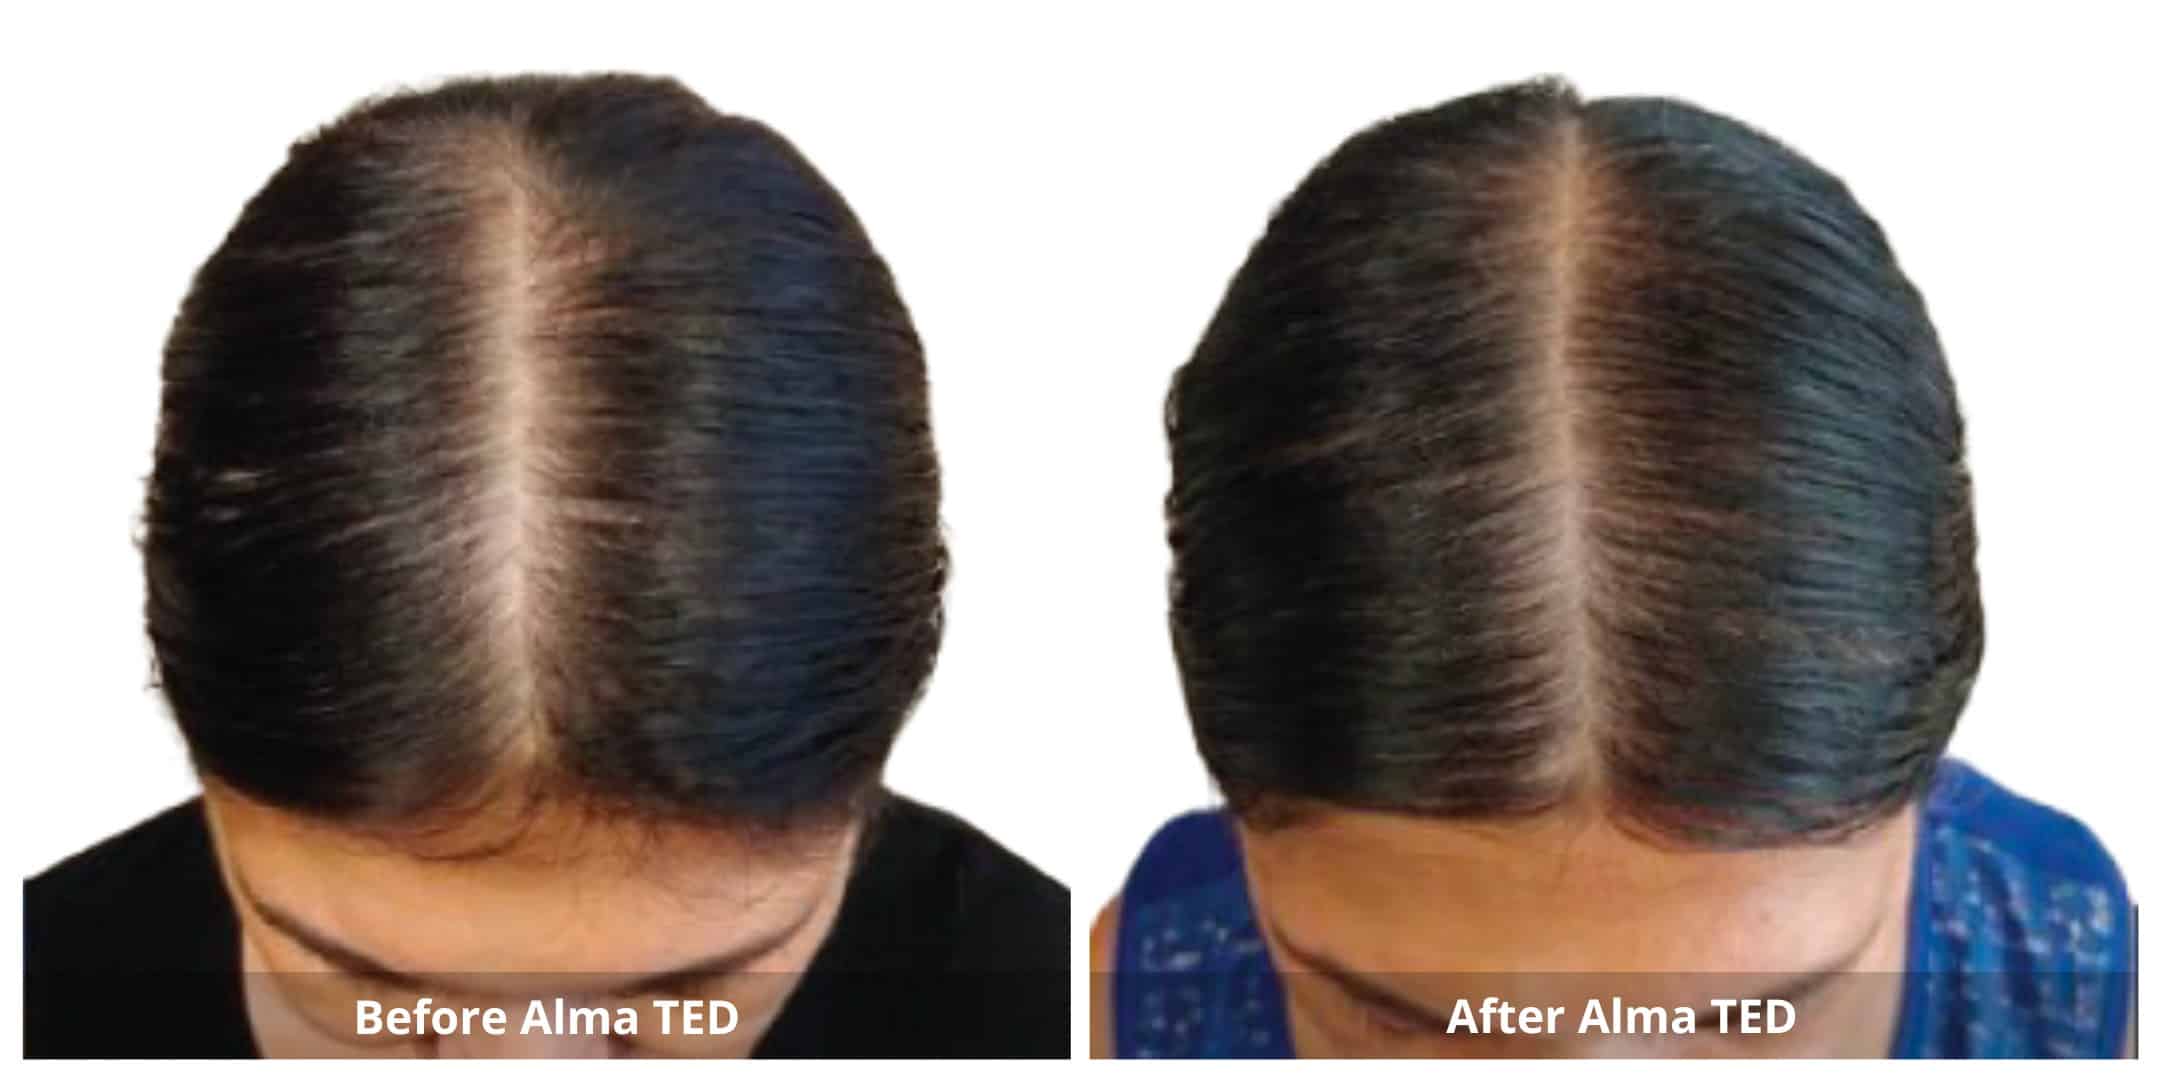 Alma ted hair restoration before and after photo 6